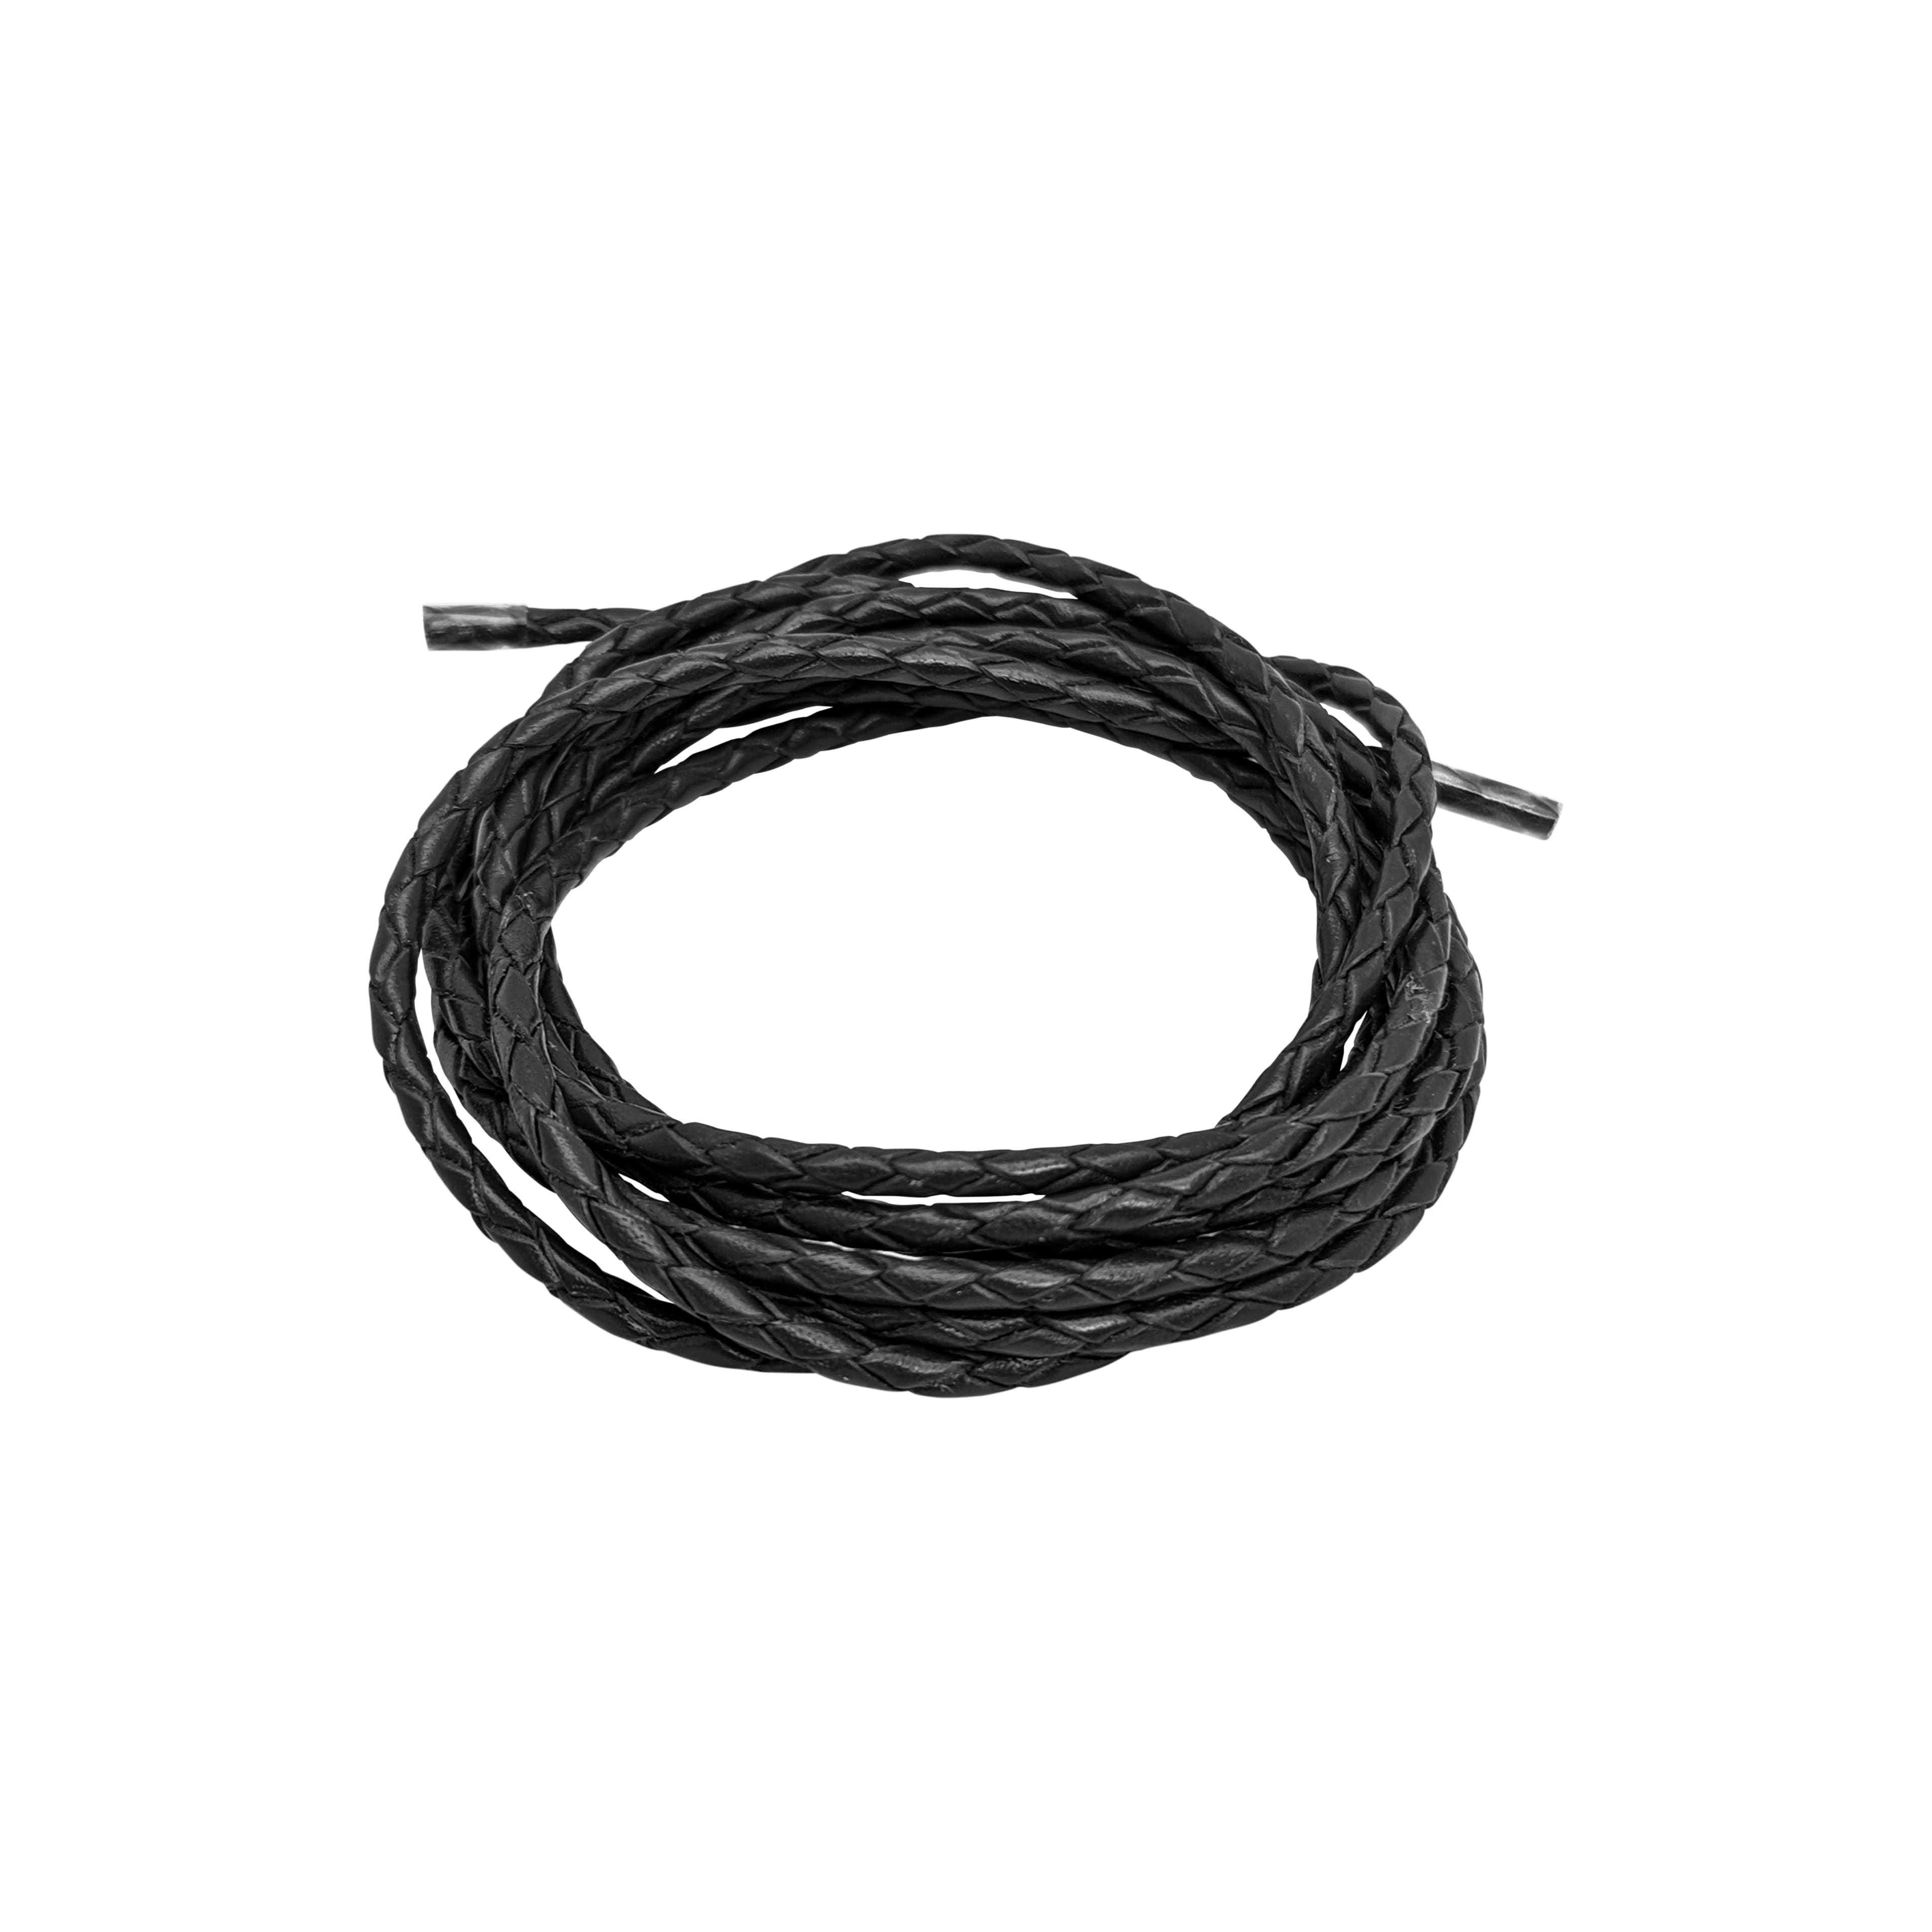 Beads Unlimited Black Suede Cord 2m